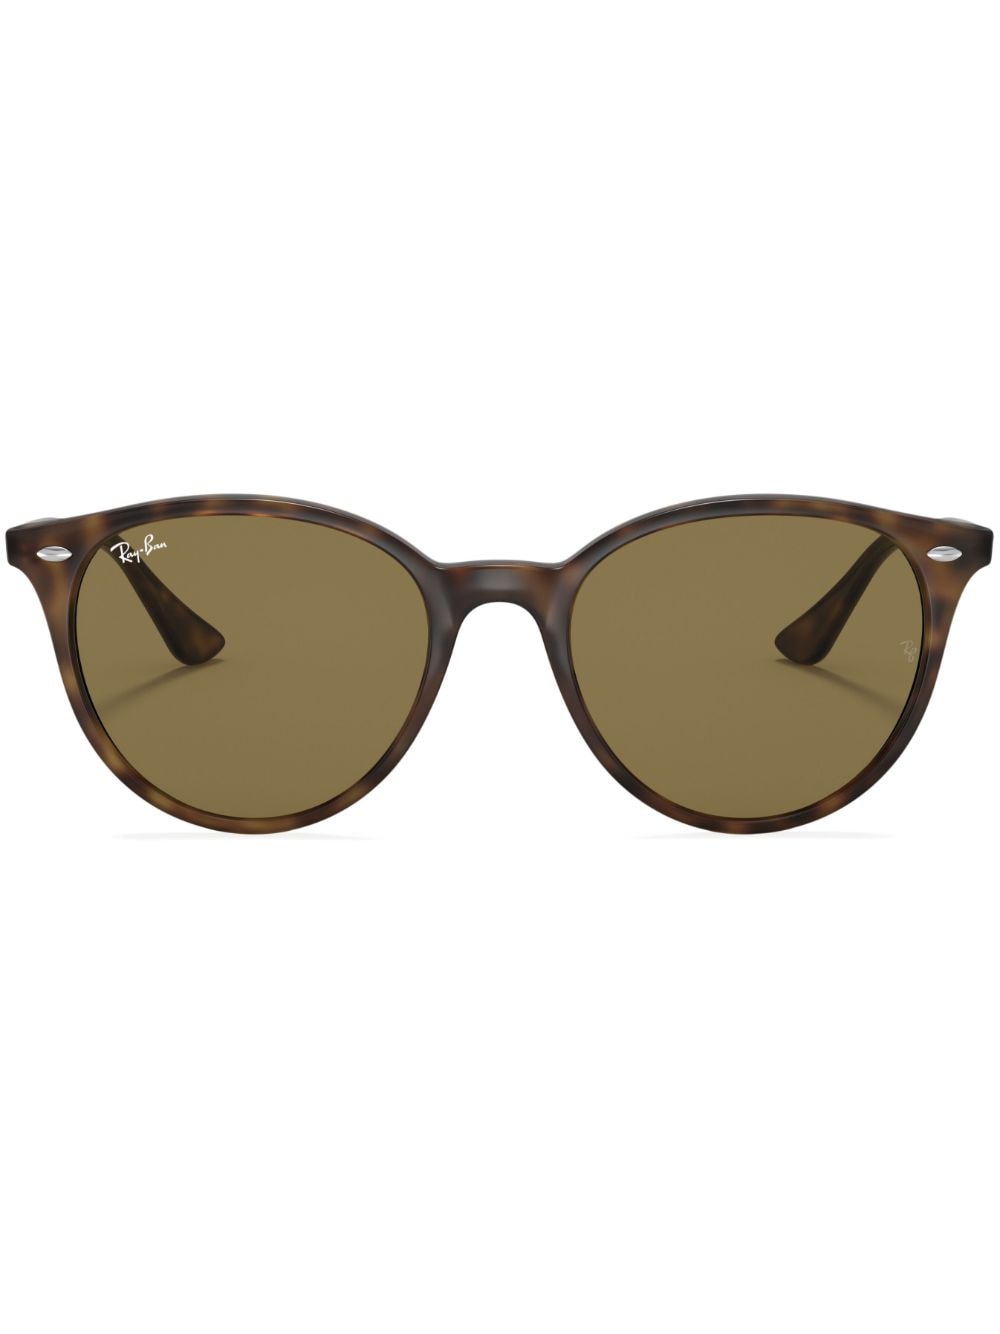 Image 2 of Ray-Ban round frame sunglasses